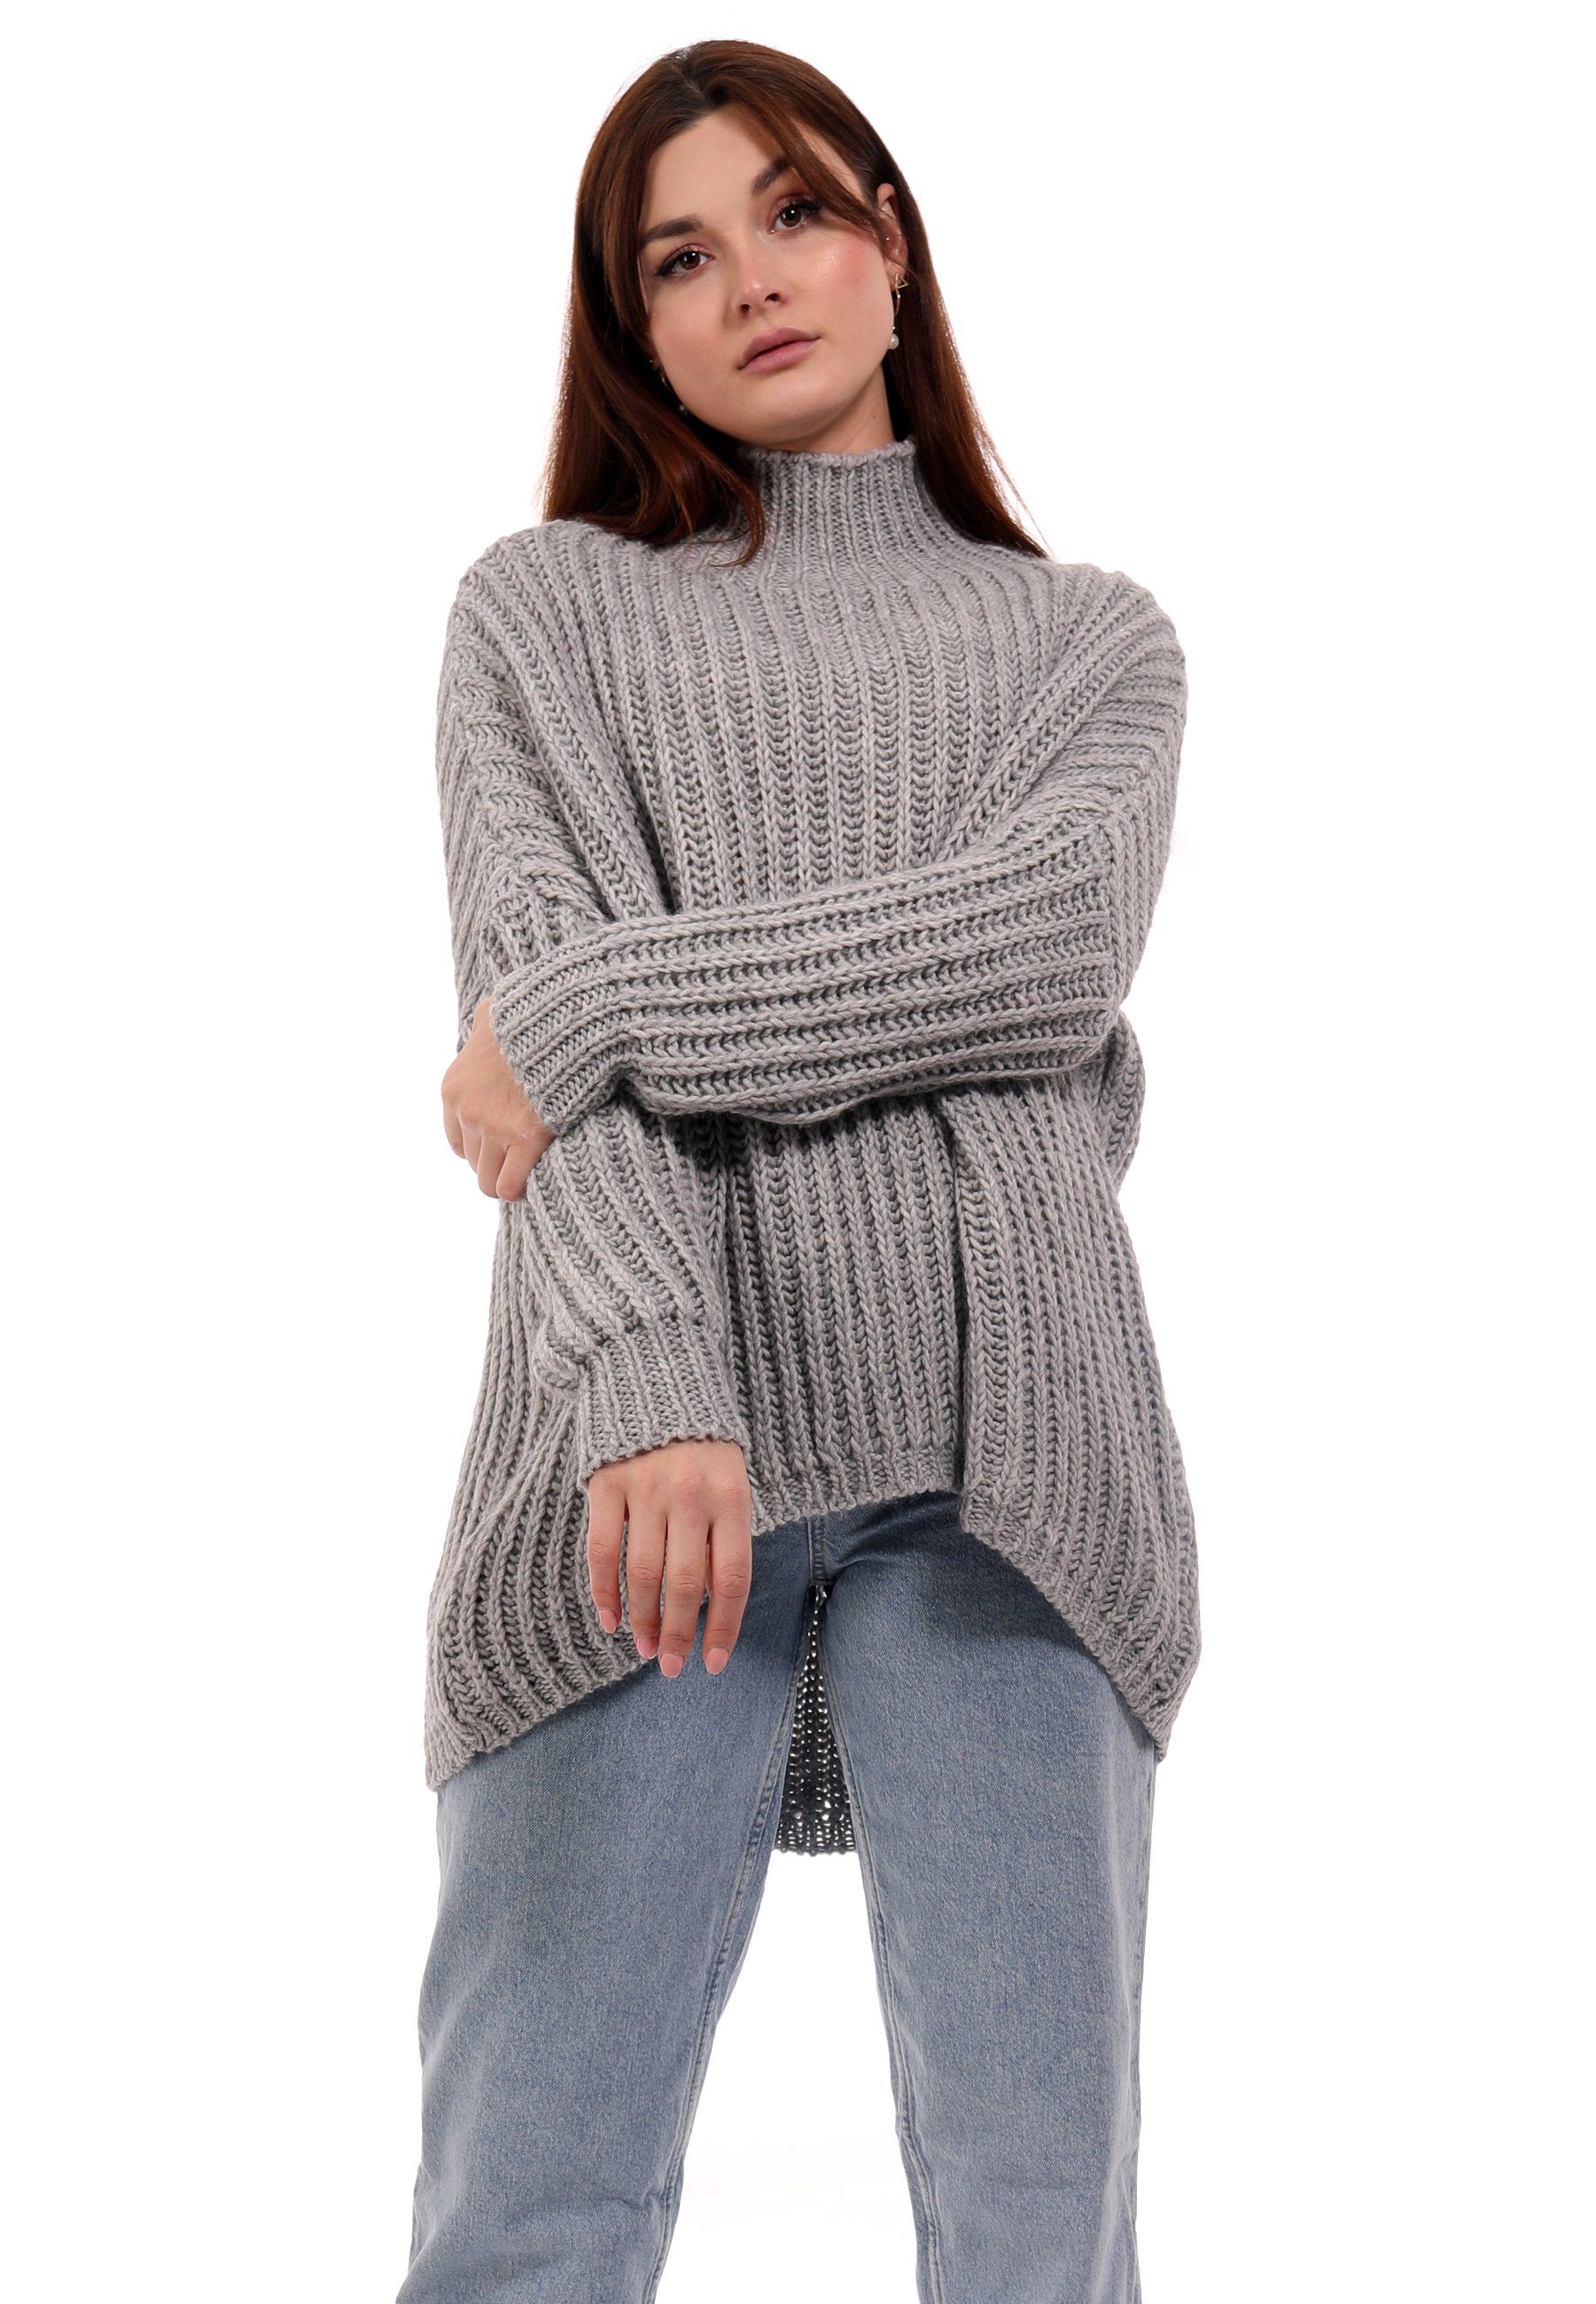 Style Sweater One Oversized Longpullover Vokuhila grau & YC (1-tlg) Grobstrick Pullover Fashion casual Size